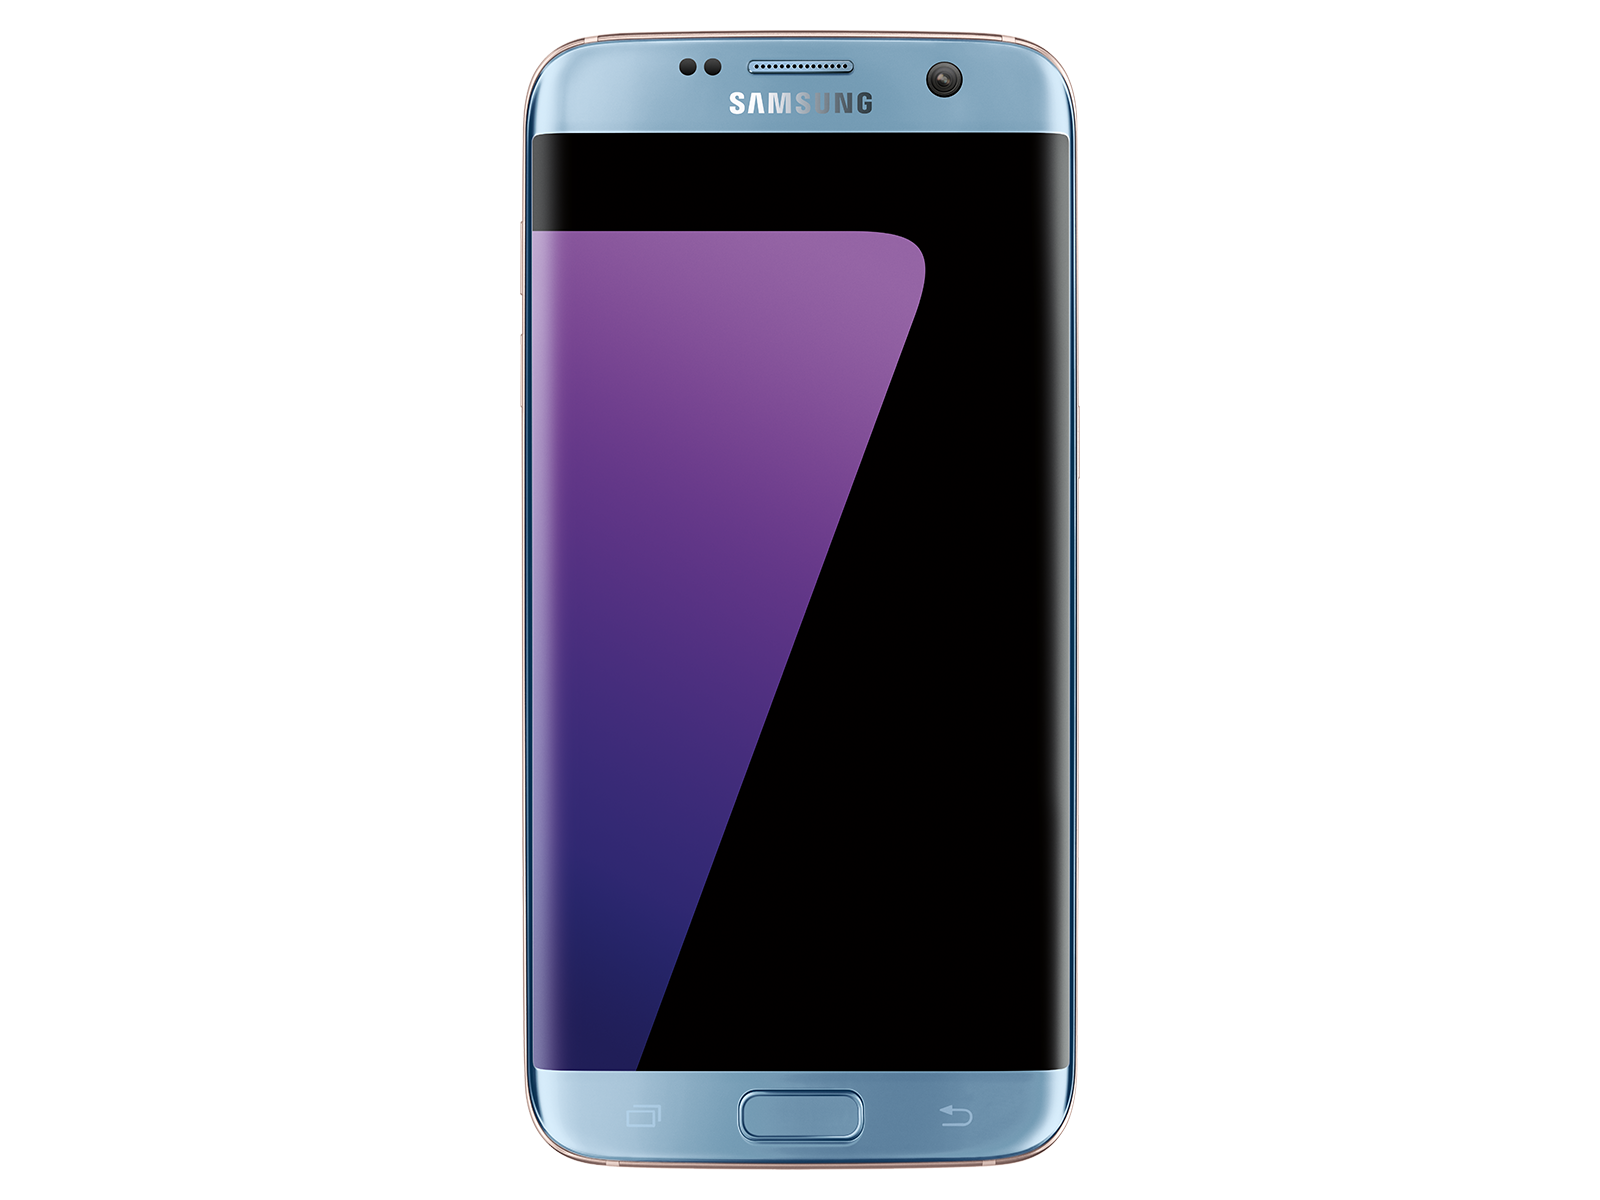 Samsung Galaxy S7 edge (G935A) - Notifications - AT&T